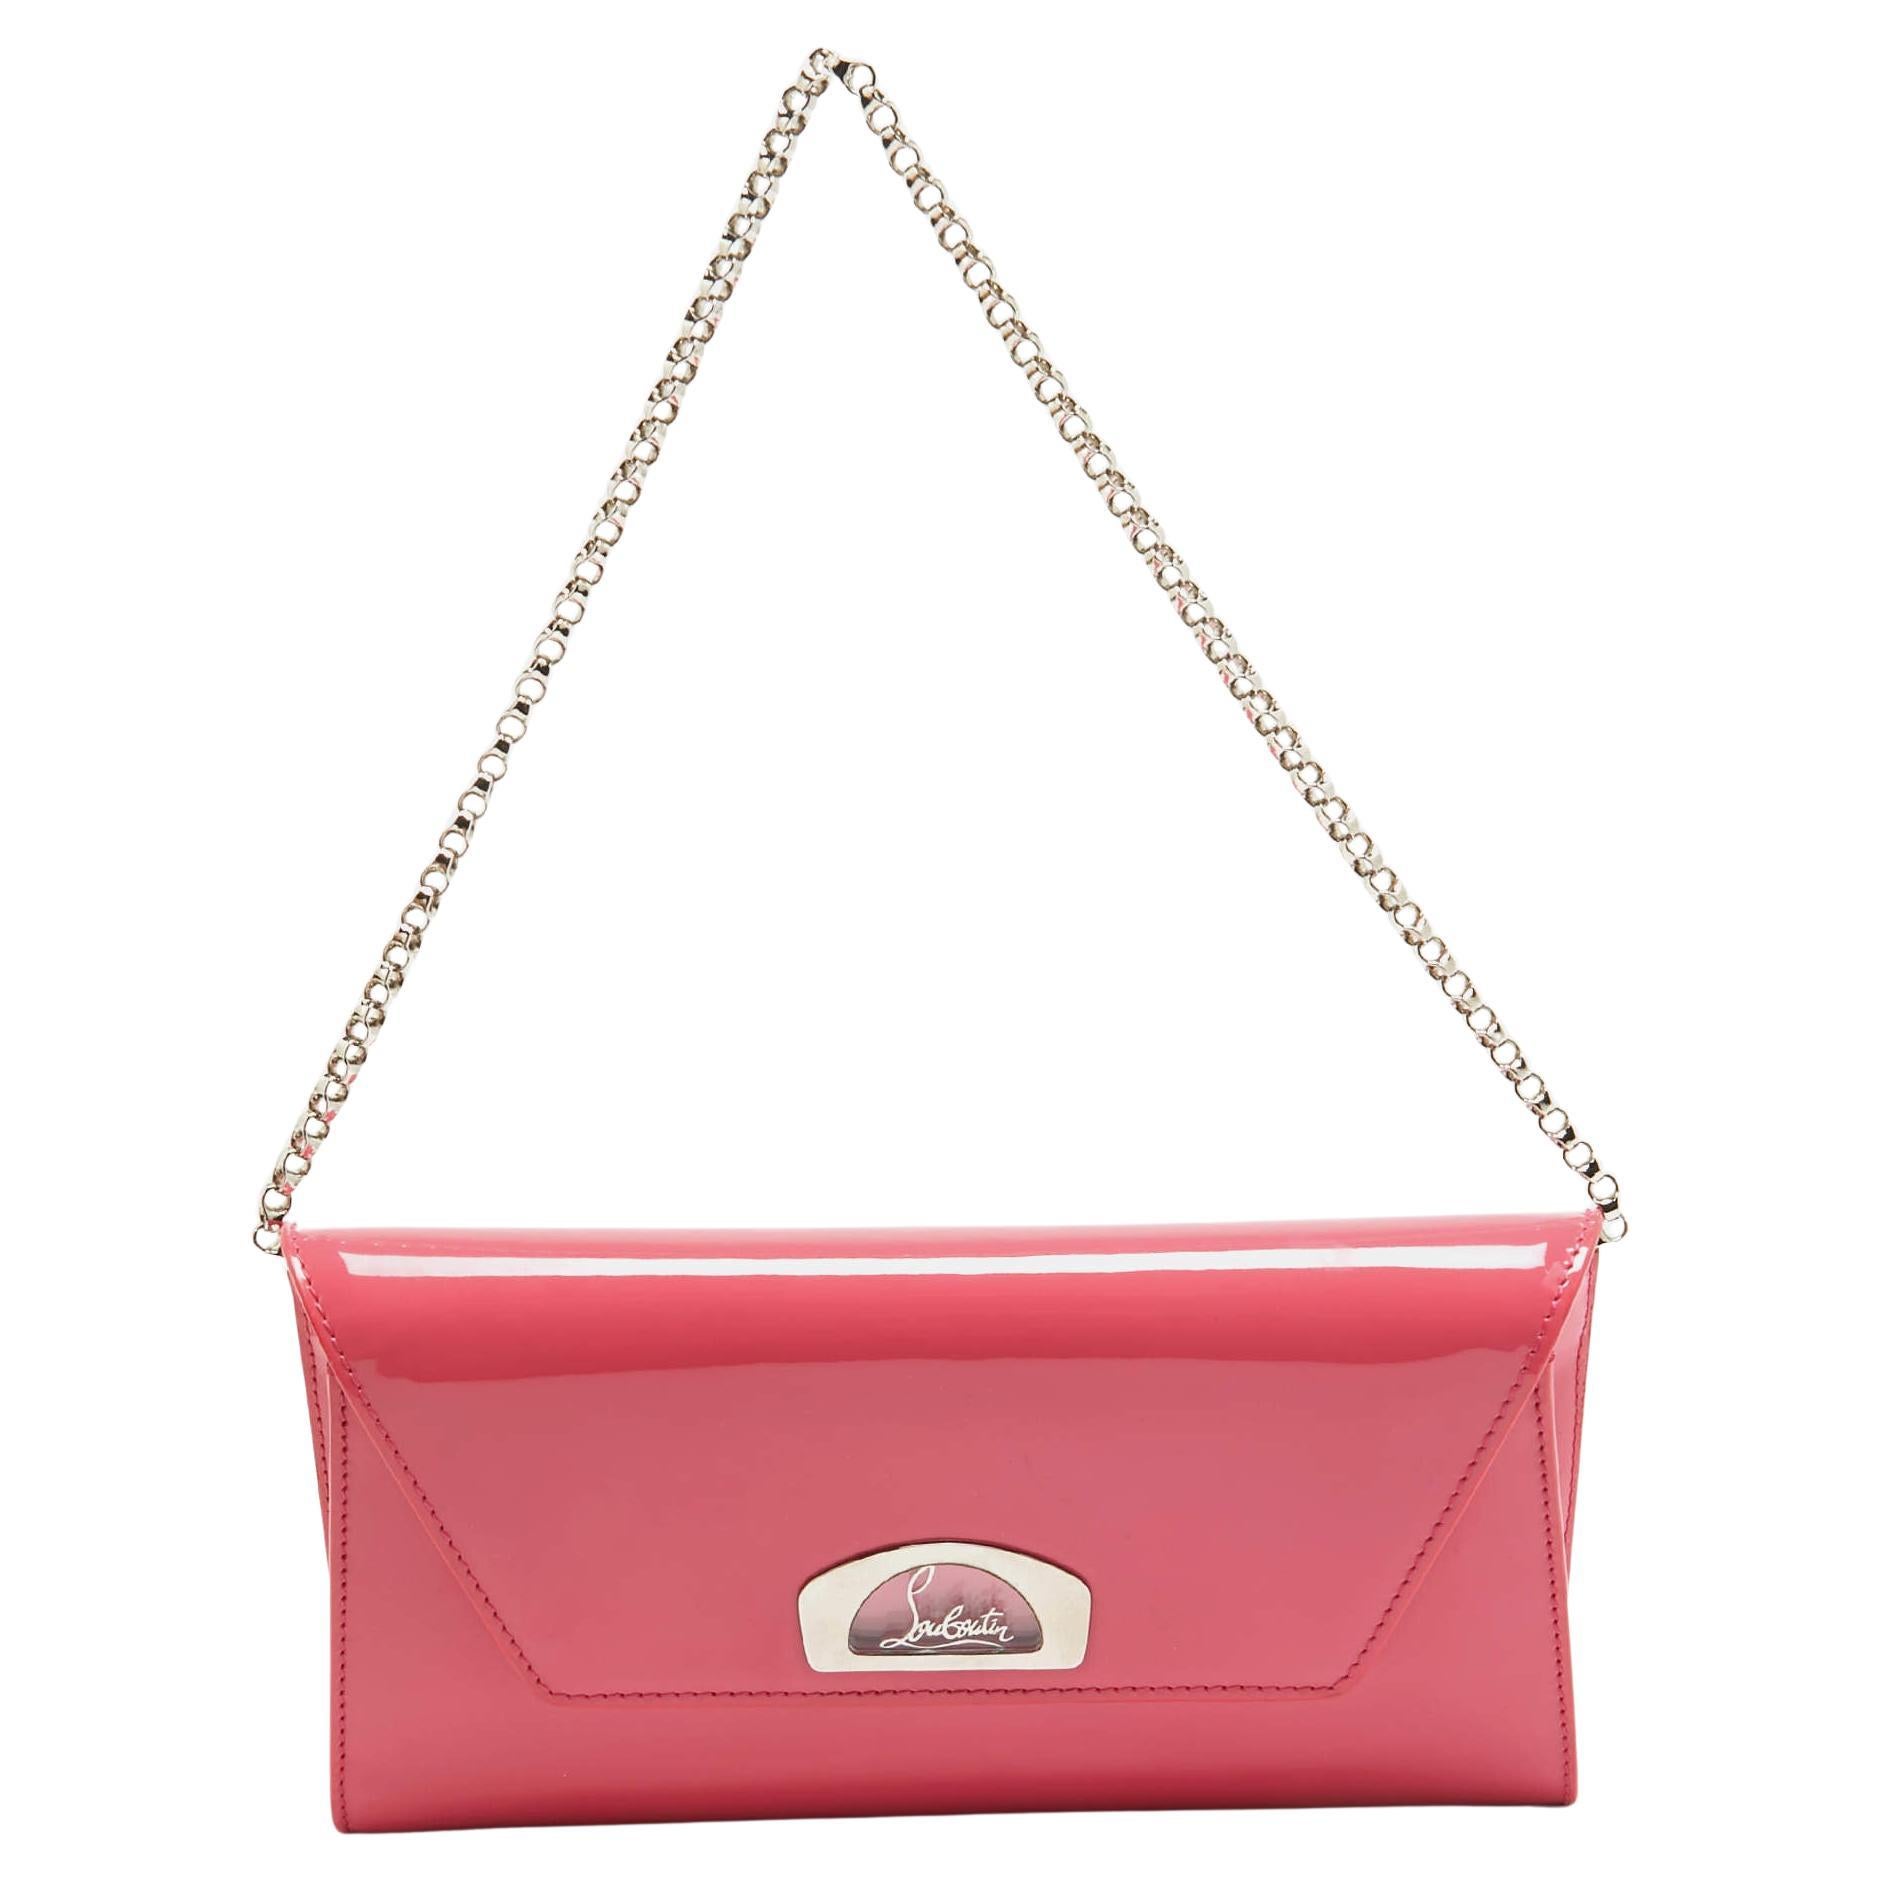 Christian Louboutin Pink Patent Leather Vero Dodat Chain Clutch